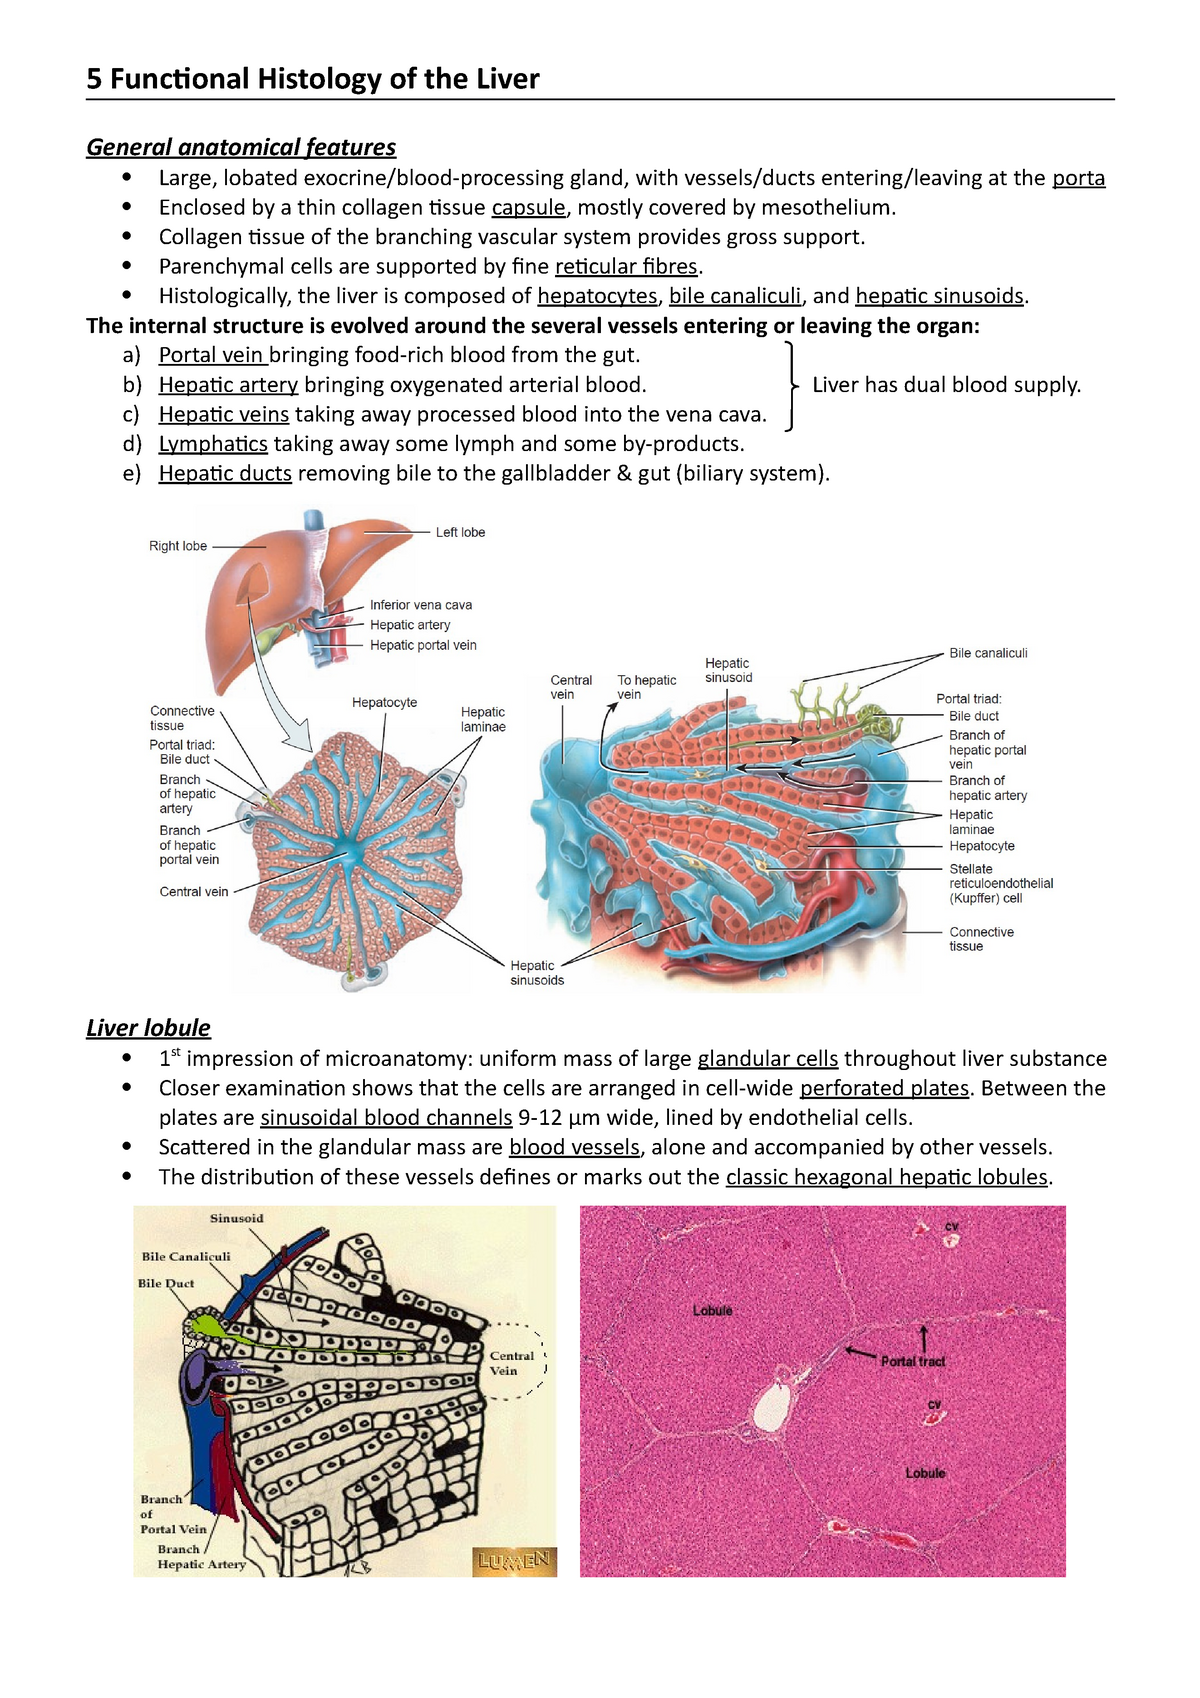 5 Anatomy And Functional Histology Of The Liver 5 Functional